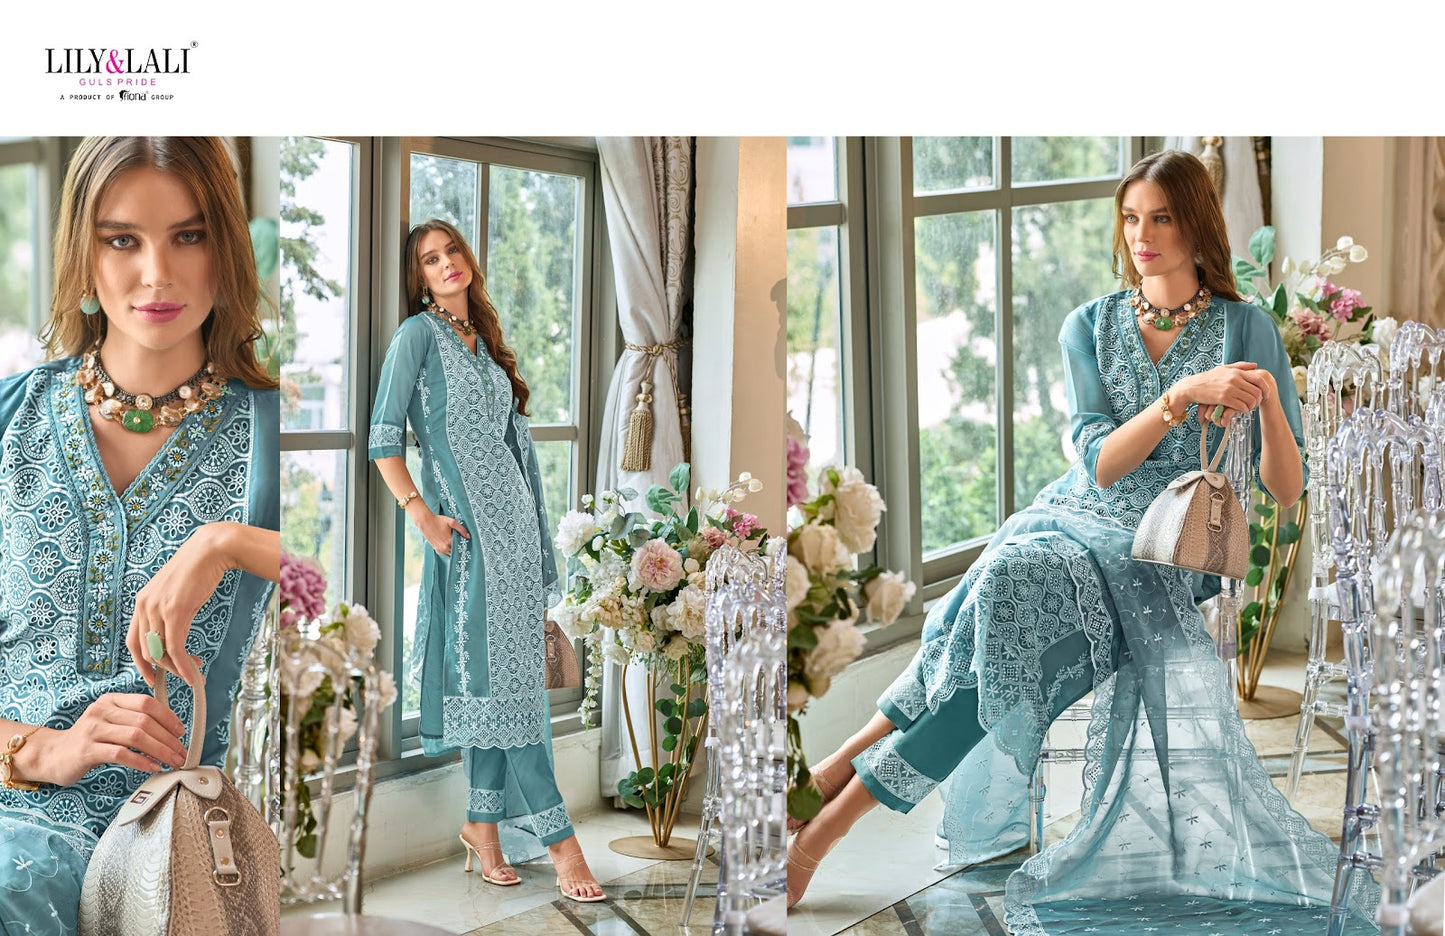 Summer Blossom Lily Lali Organza Readymade Pant Style Suits